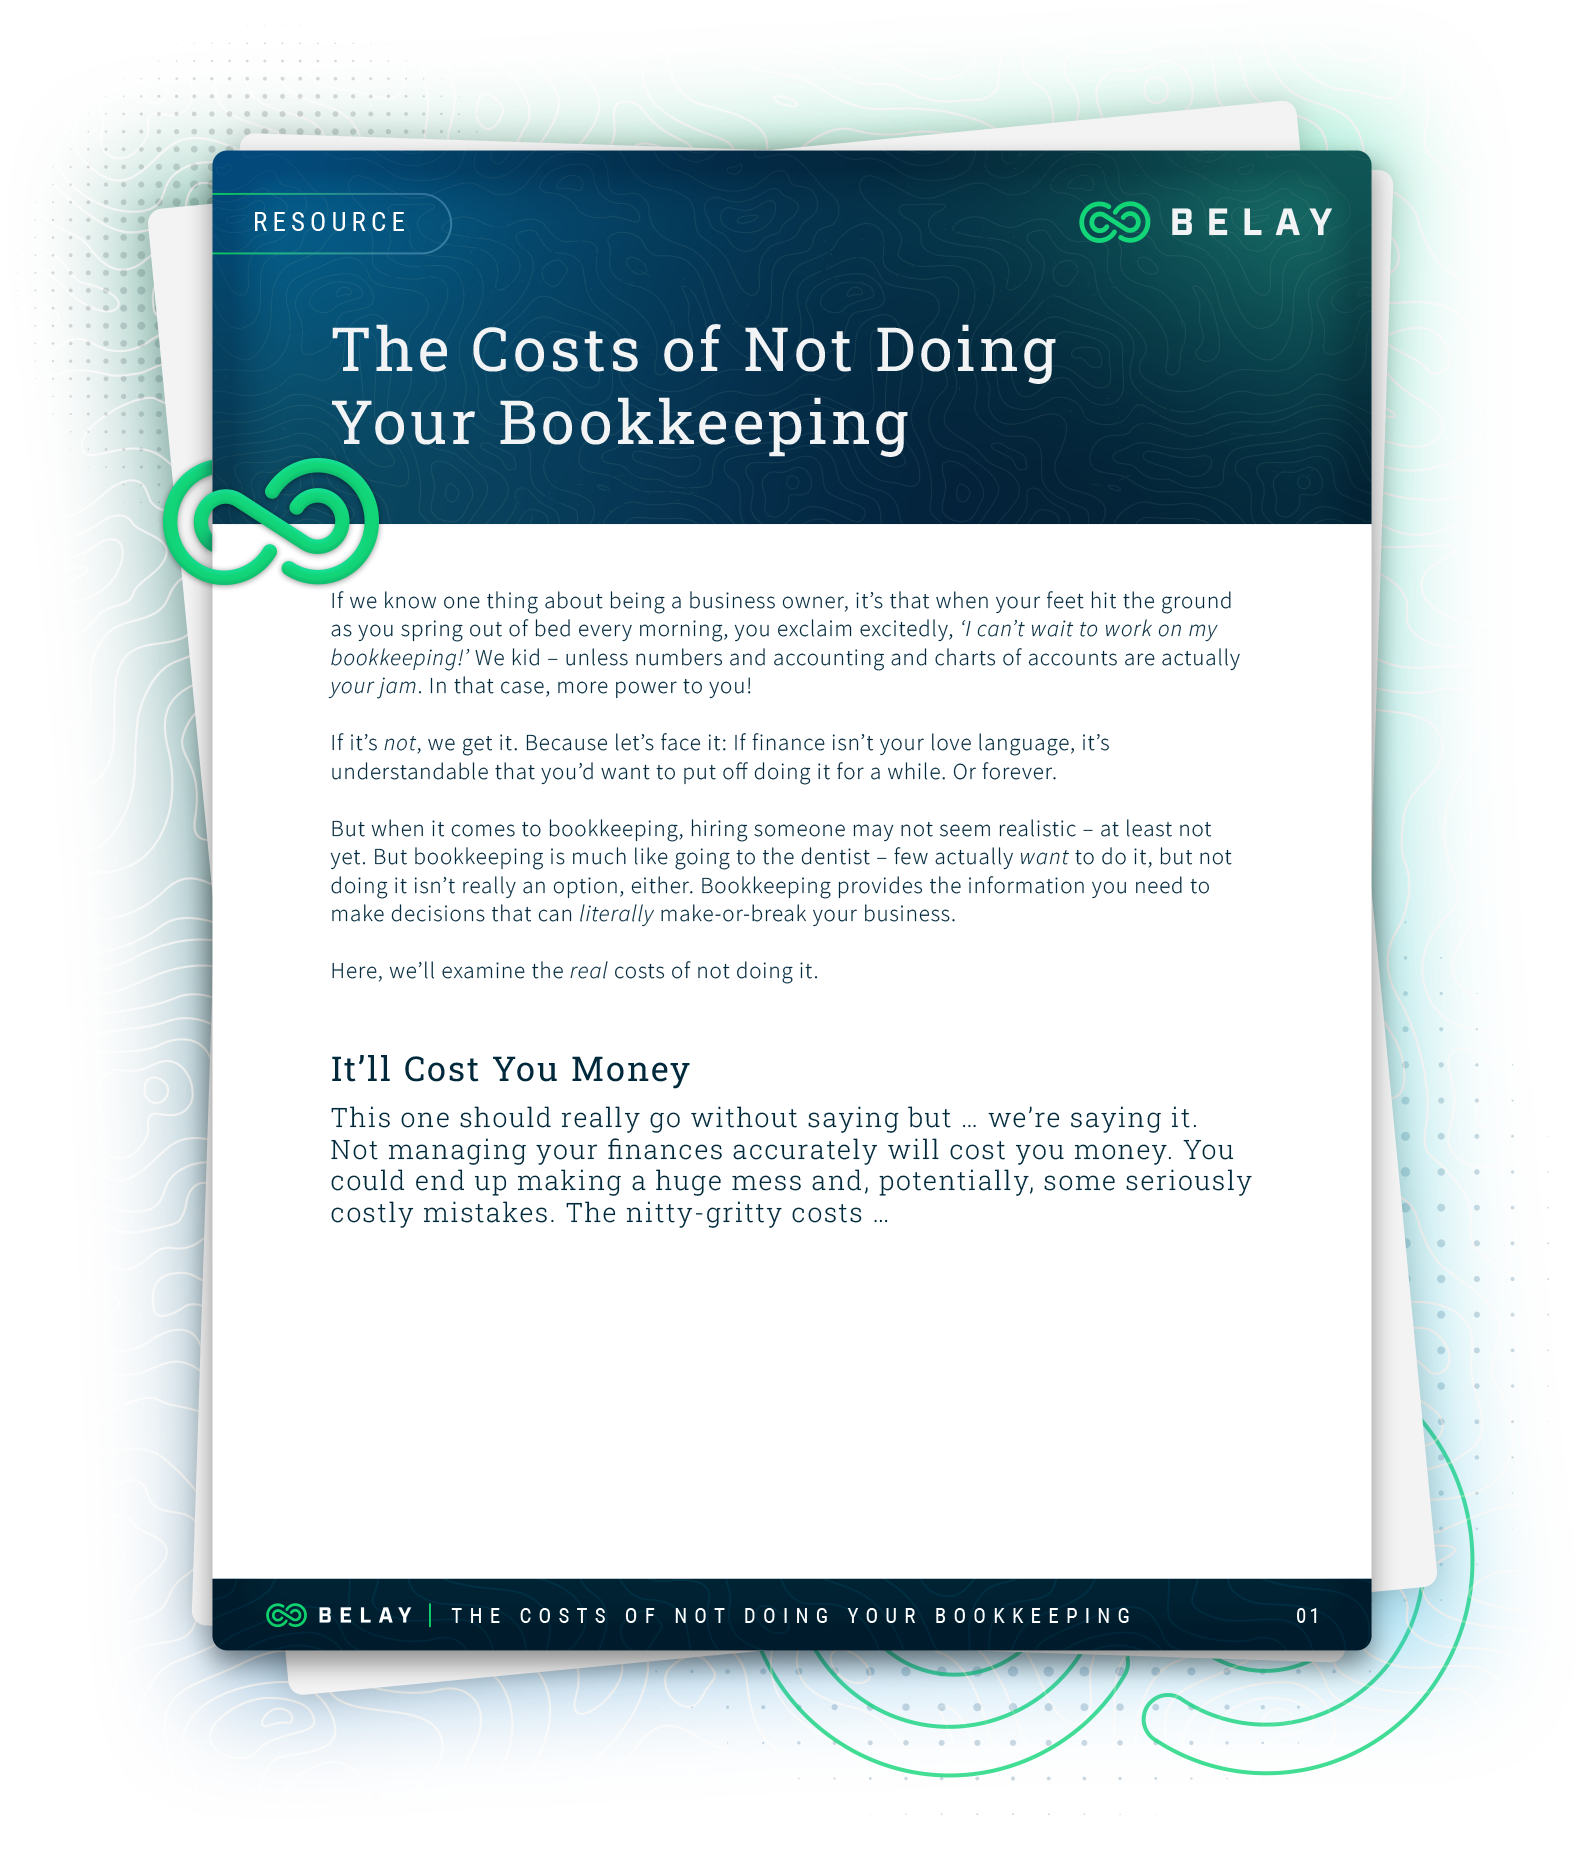 The Cost of Not Doing Your Bookkeeping